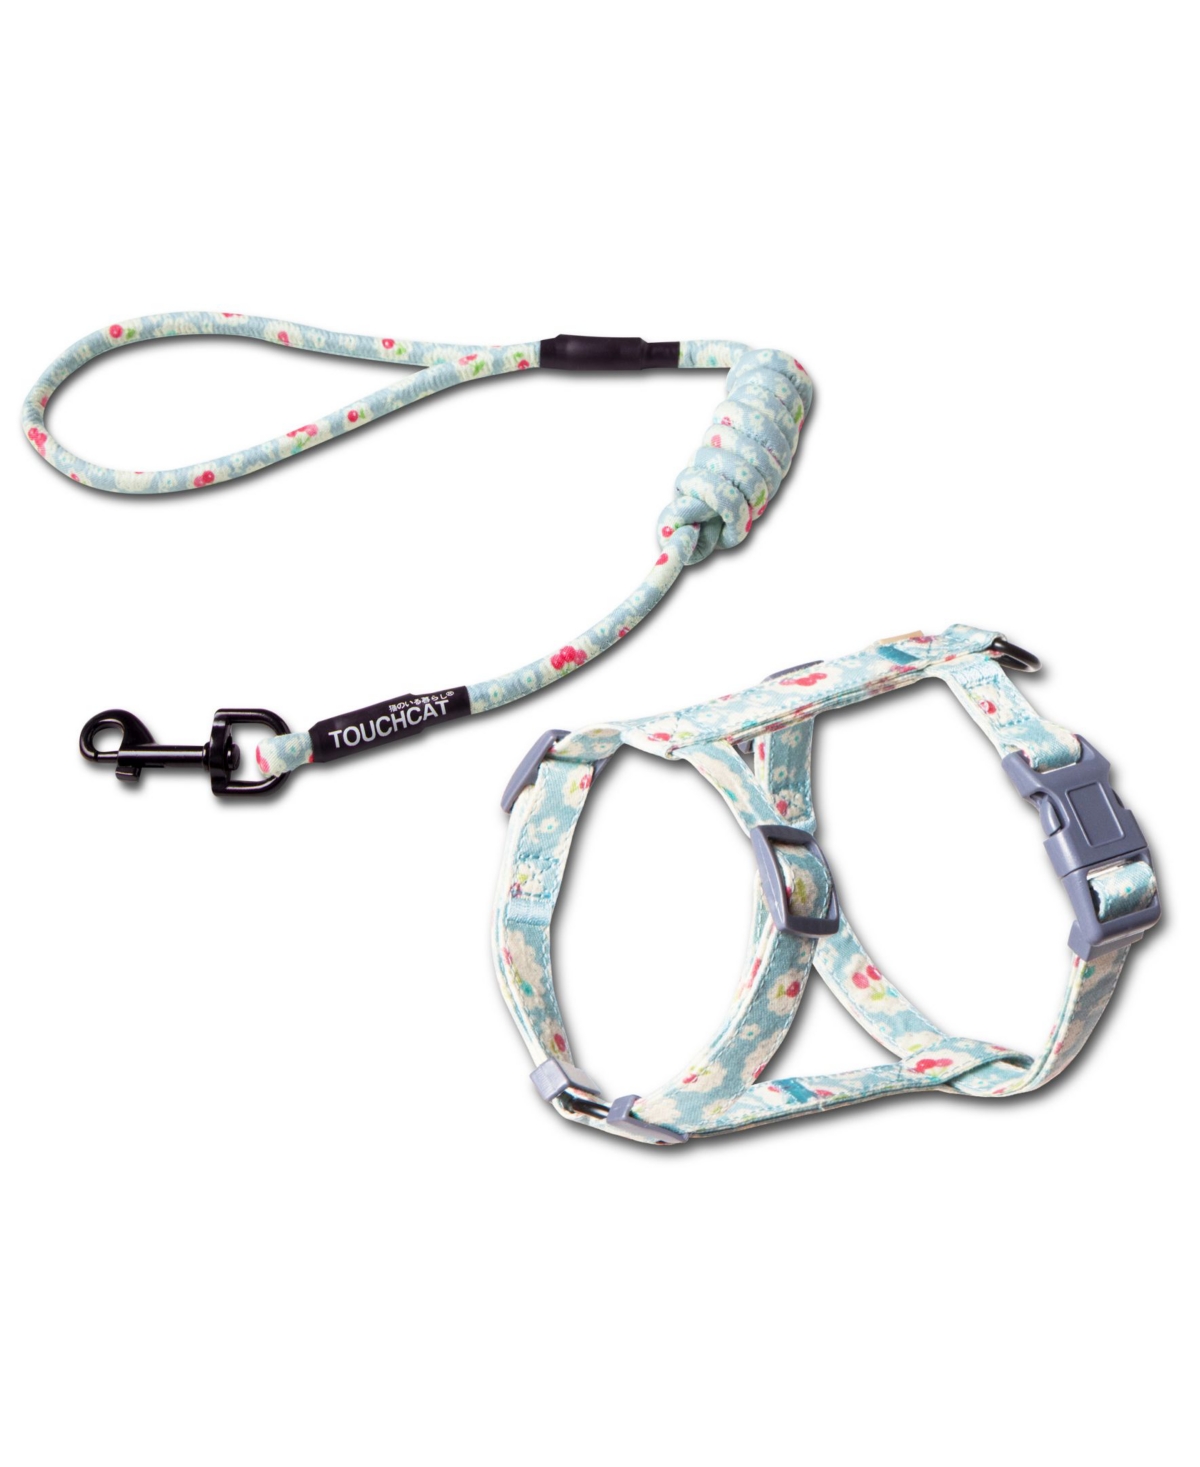 'Radi-Claw' Durable Cable Cat Harness and Leash Combo - Blue